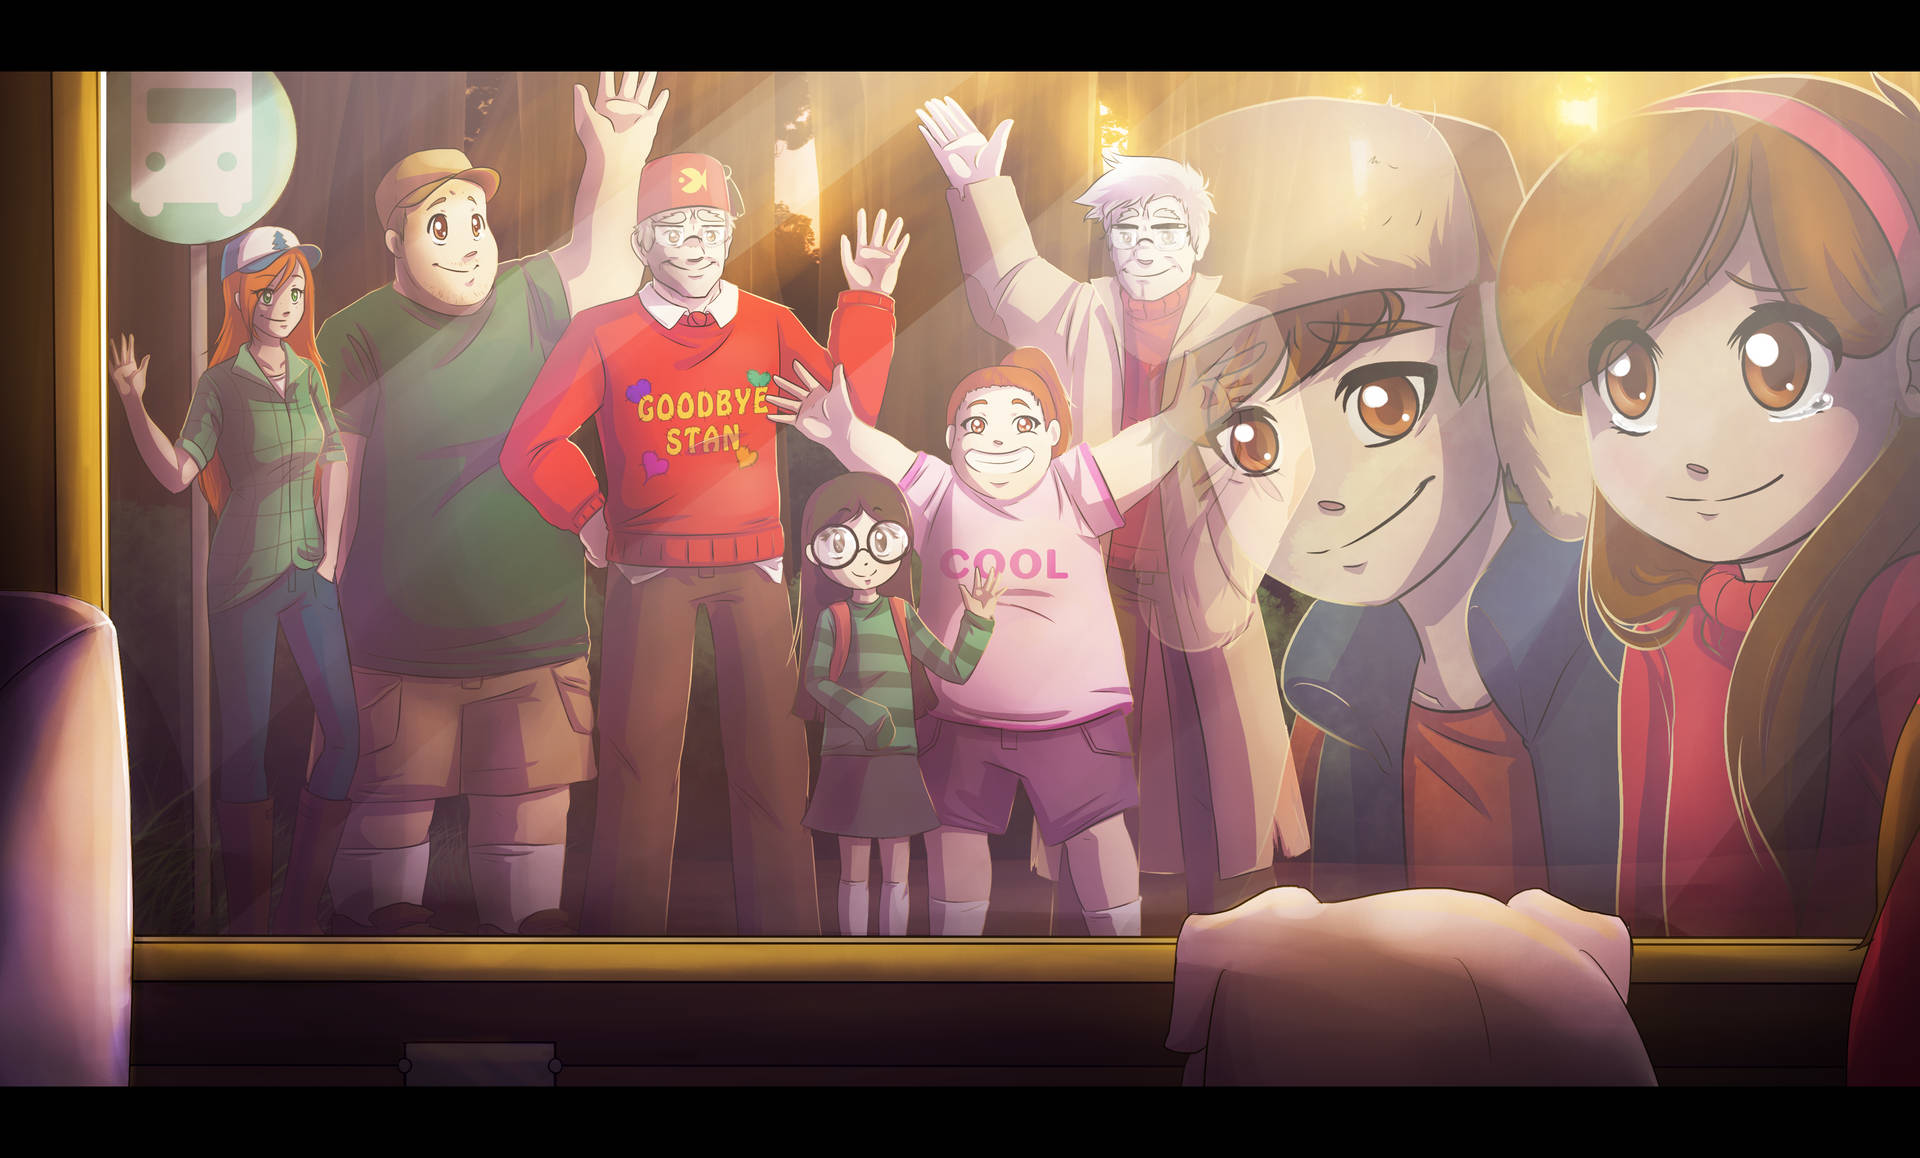 Enter the world of Gravity Falls in this anime-style art. Wallpaper